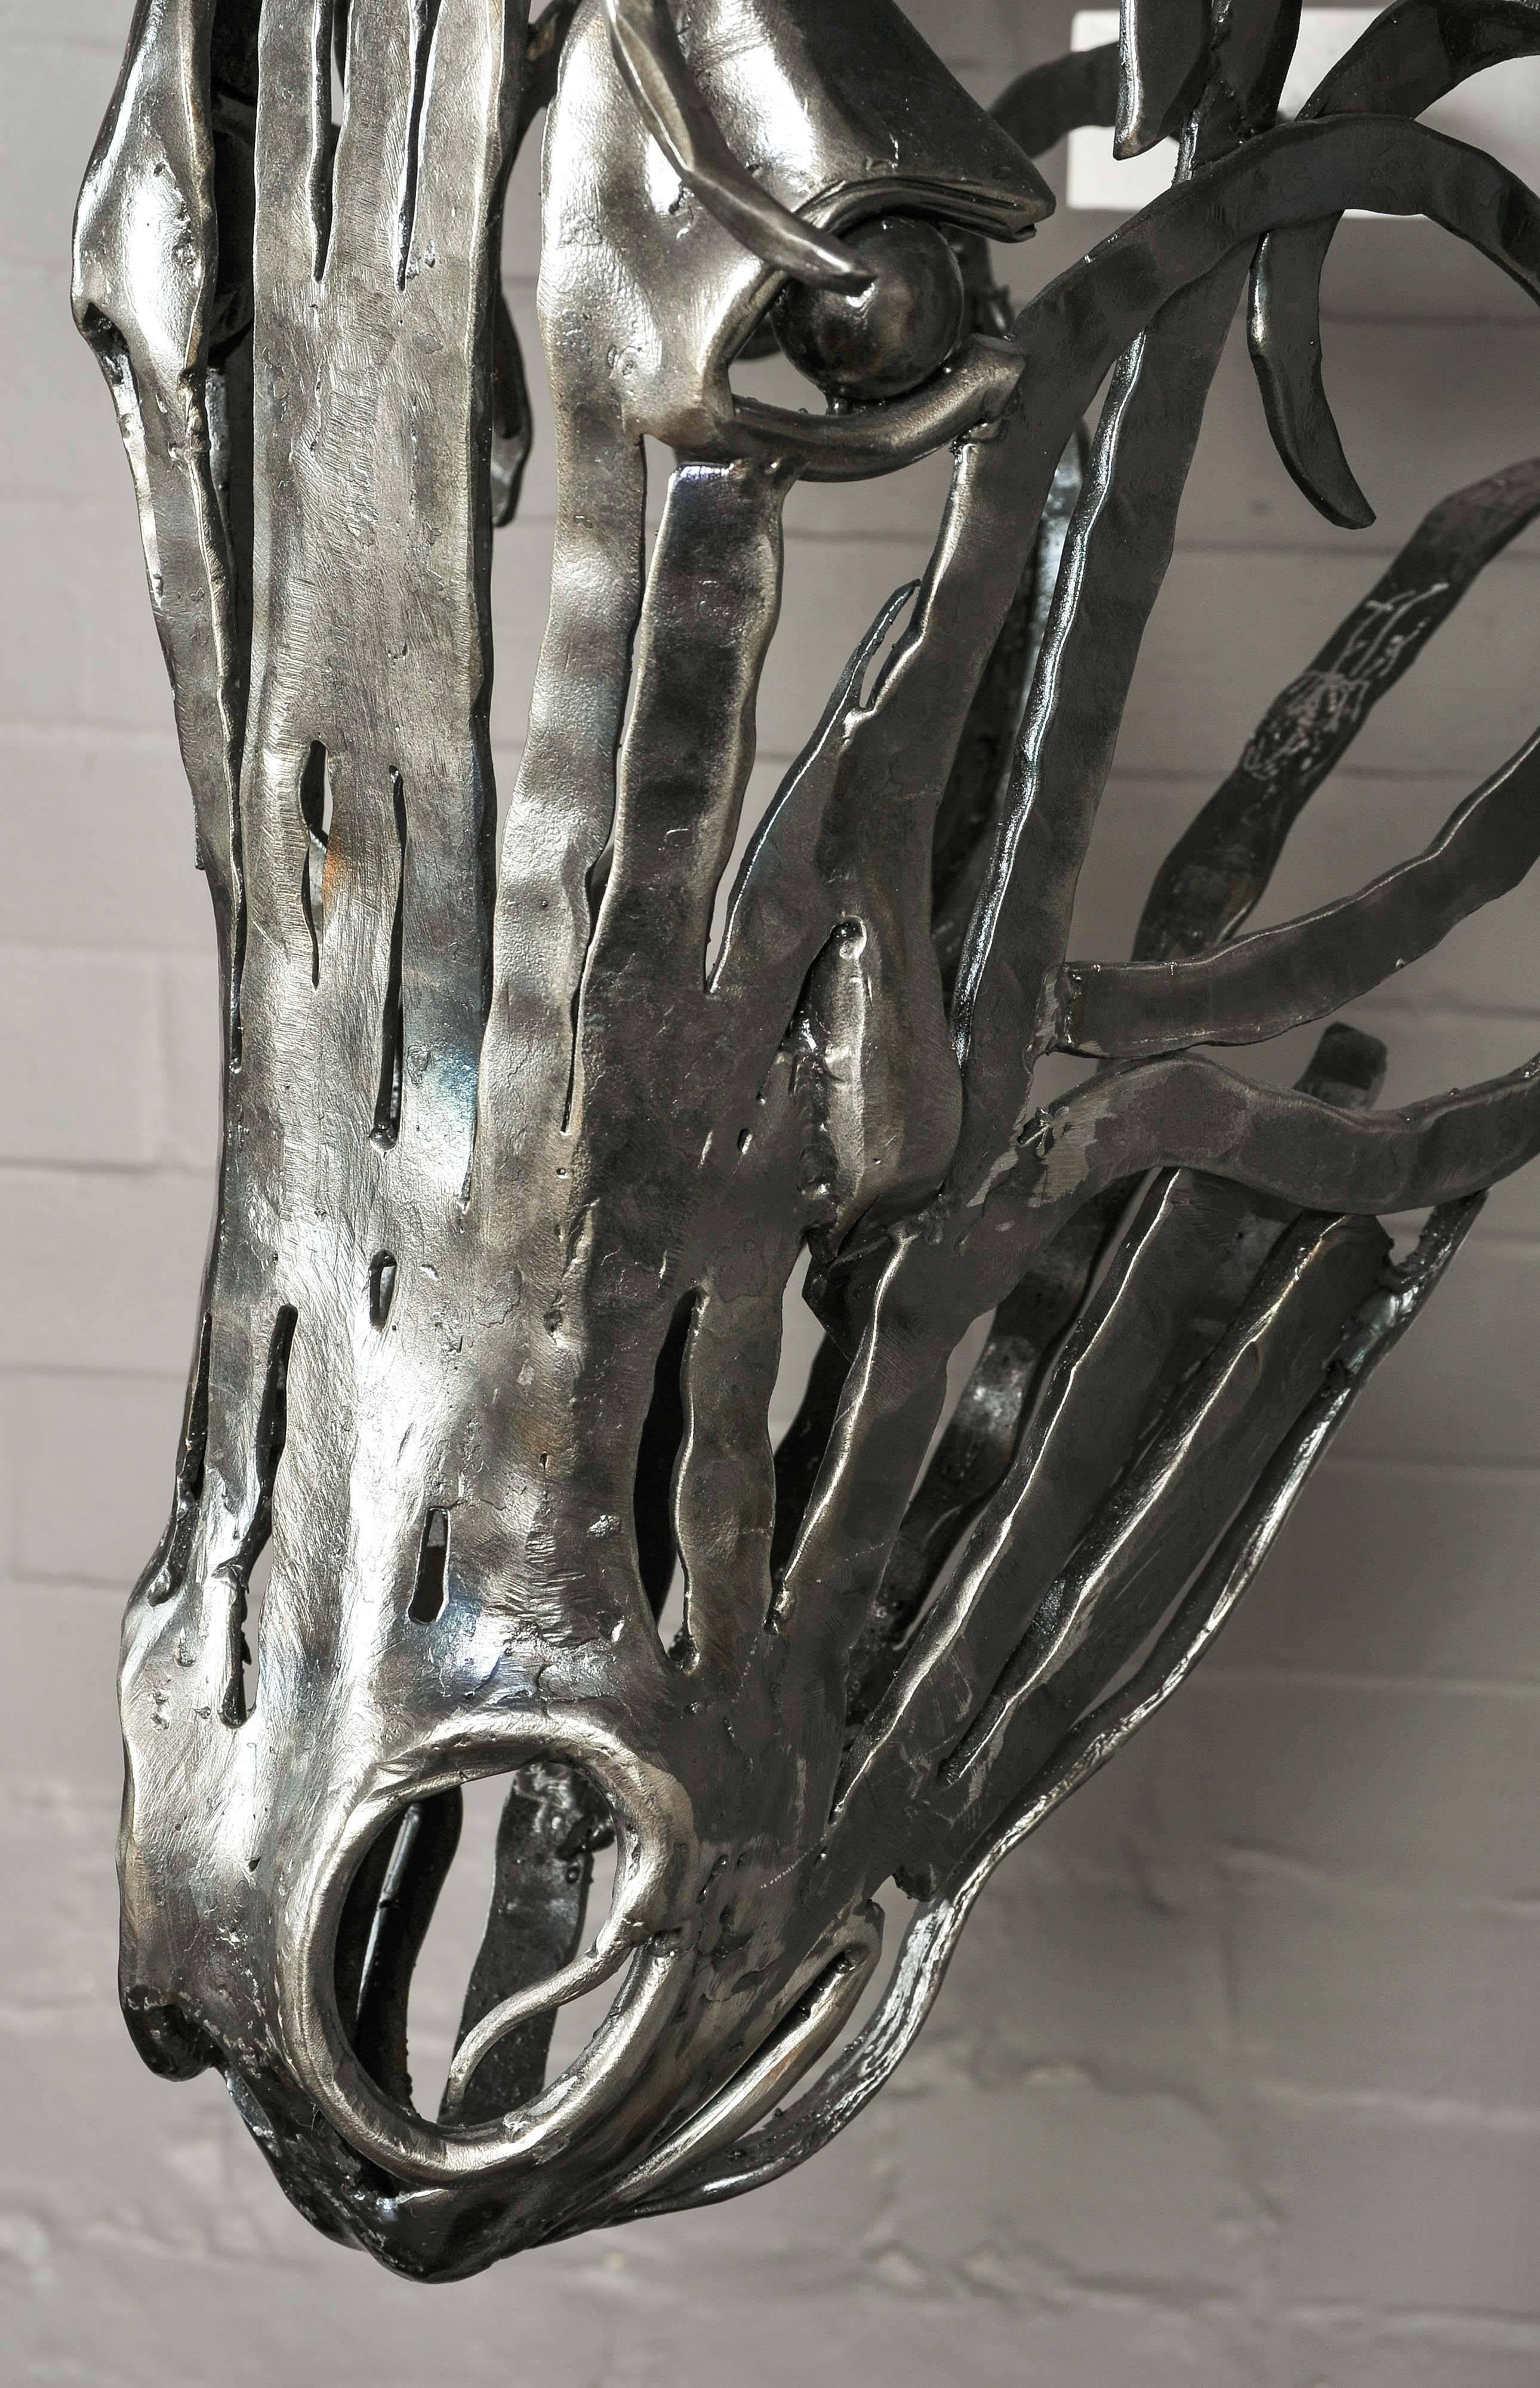 Unique Hand-Forged Model of a Horse's Head in Textured Bar Steel For Sale 2